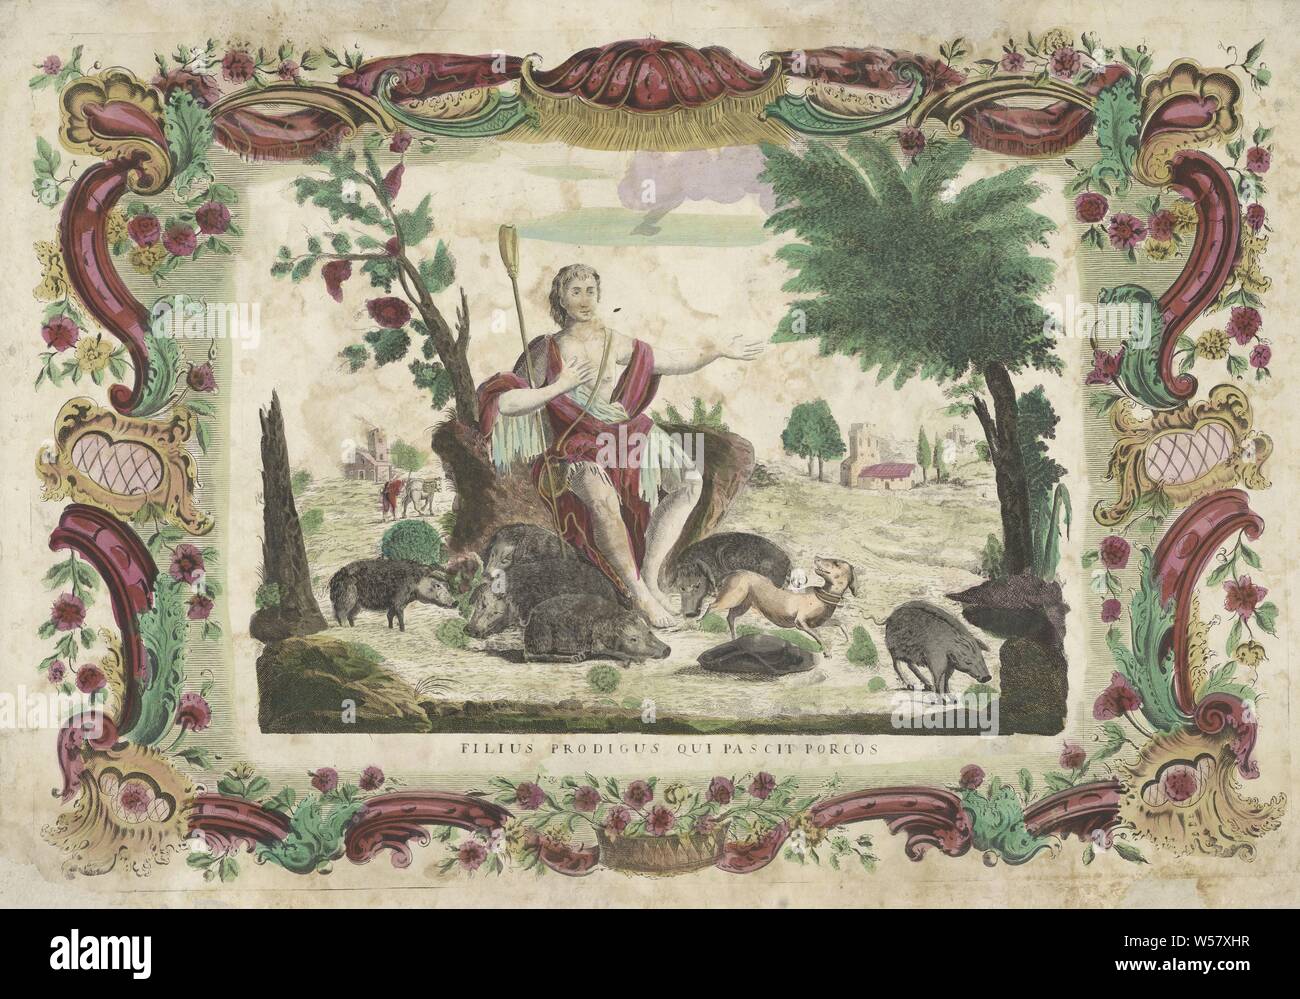 The prodigal son as a swineherd Filius prodigus qui pascit porcos (title on object), The prodigal son in frayed clothing, with shepherd's staff in hand, sitting among the pigs. Title below the show. The scene is set in an ornament border., The prodigal son tends the swine and eats from their trough, ornaments, art, Giovanni Volpato (possibly), 1700 - 1799, paper, etching, h 528 mm × w 775 mm Stock Photo